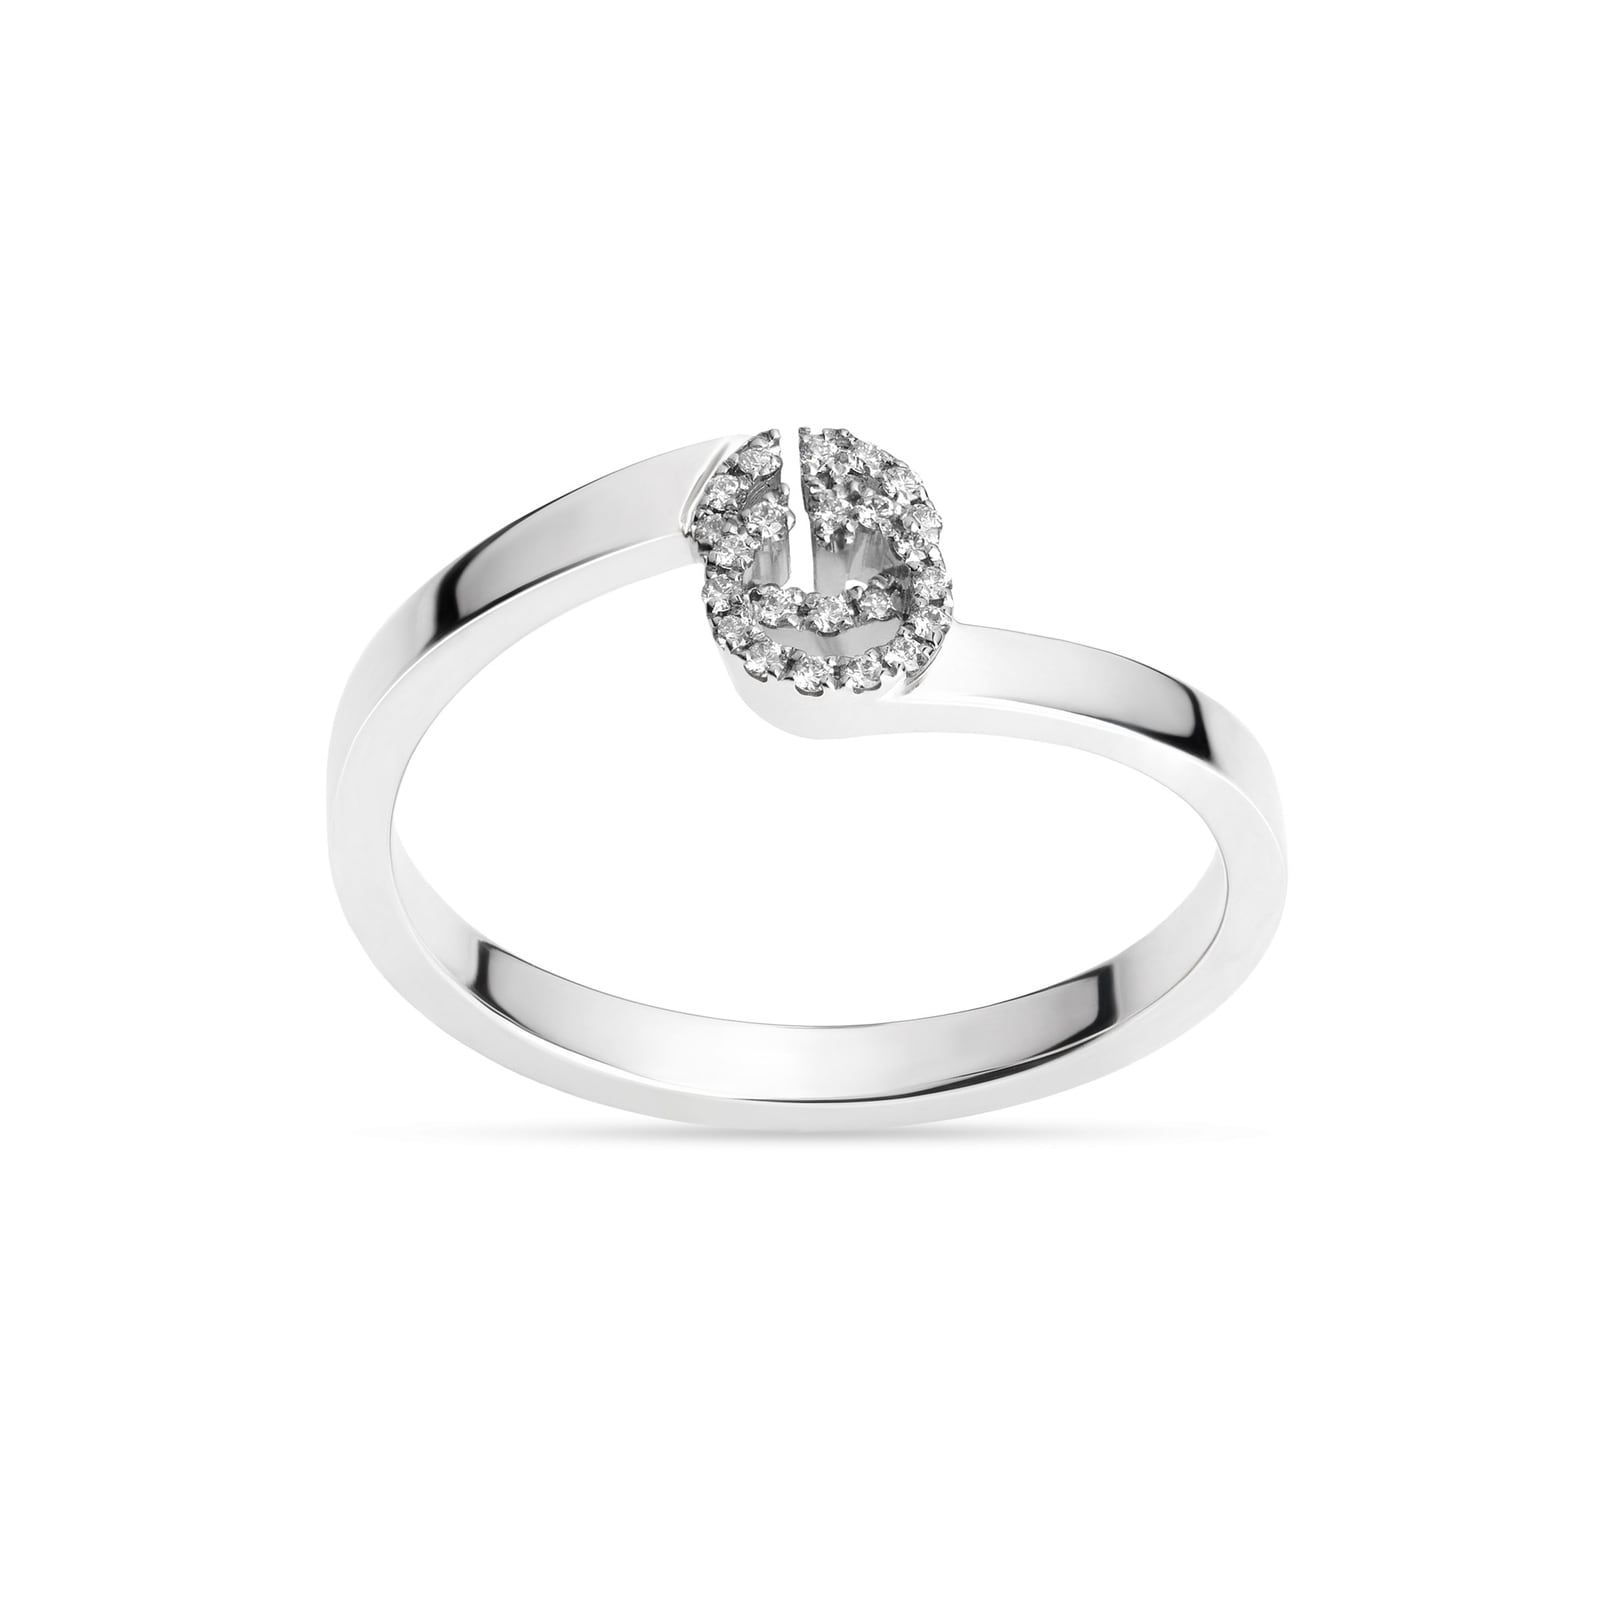 Running G Ring In 18ct White Gold With Diamonds - Ring Size M.5